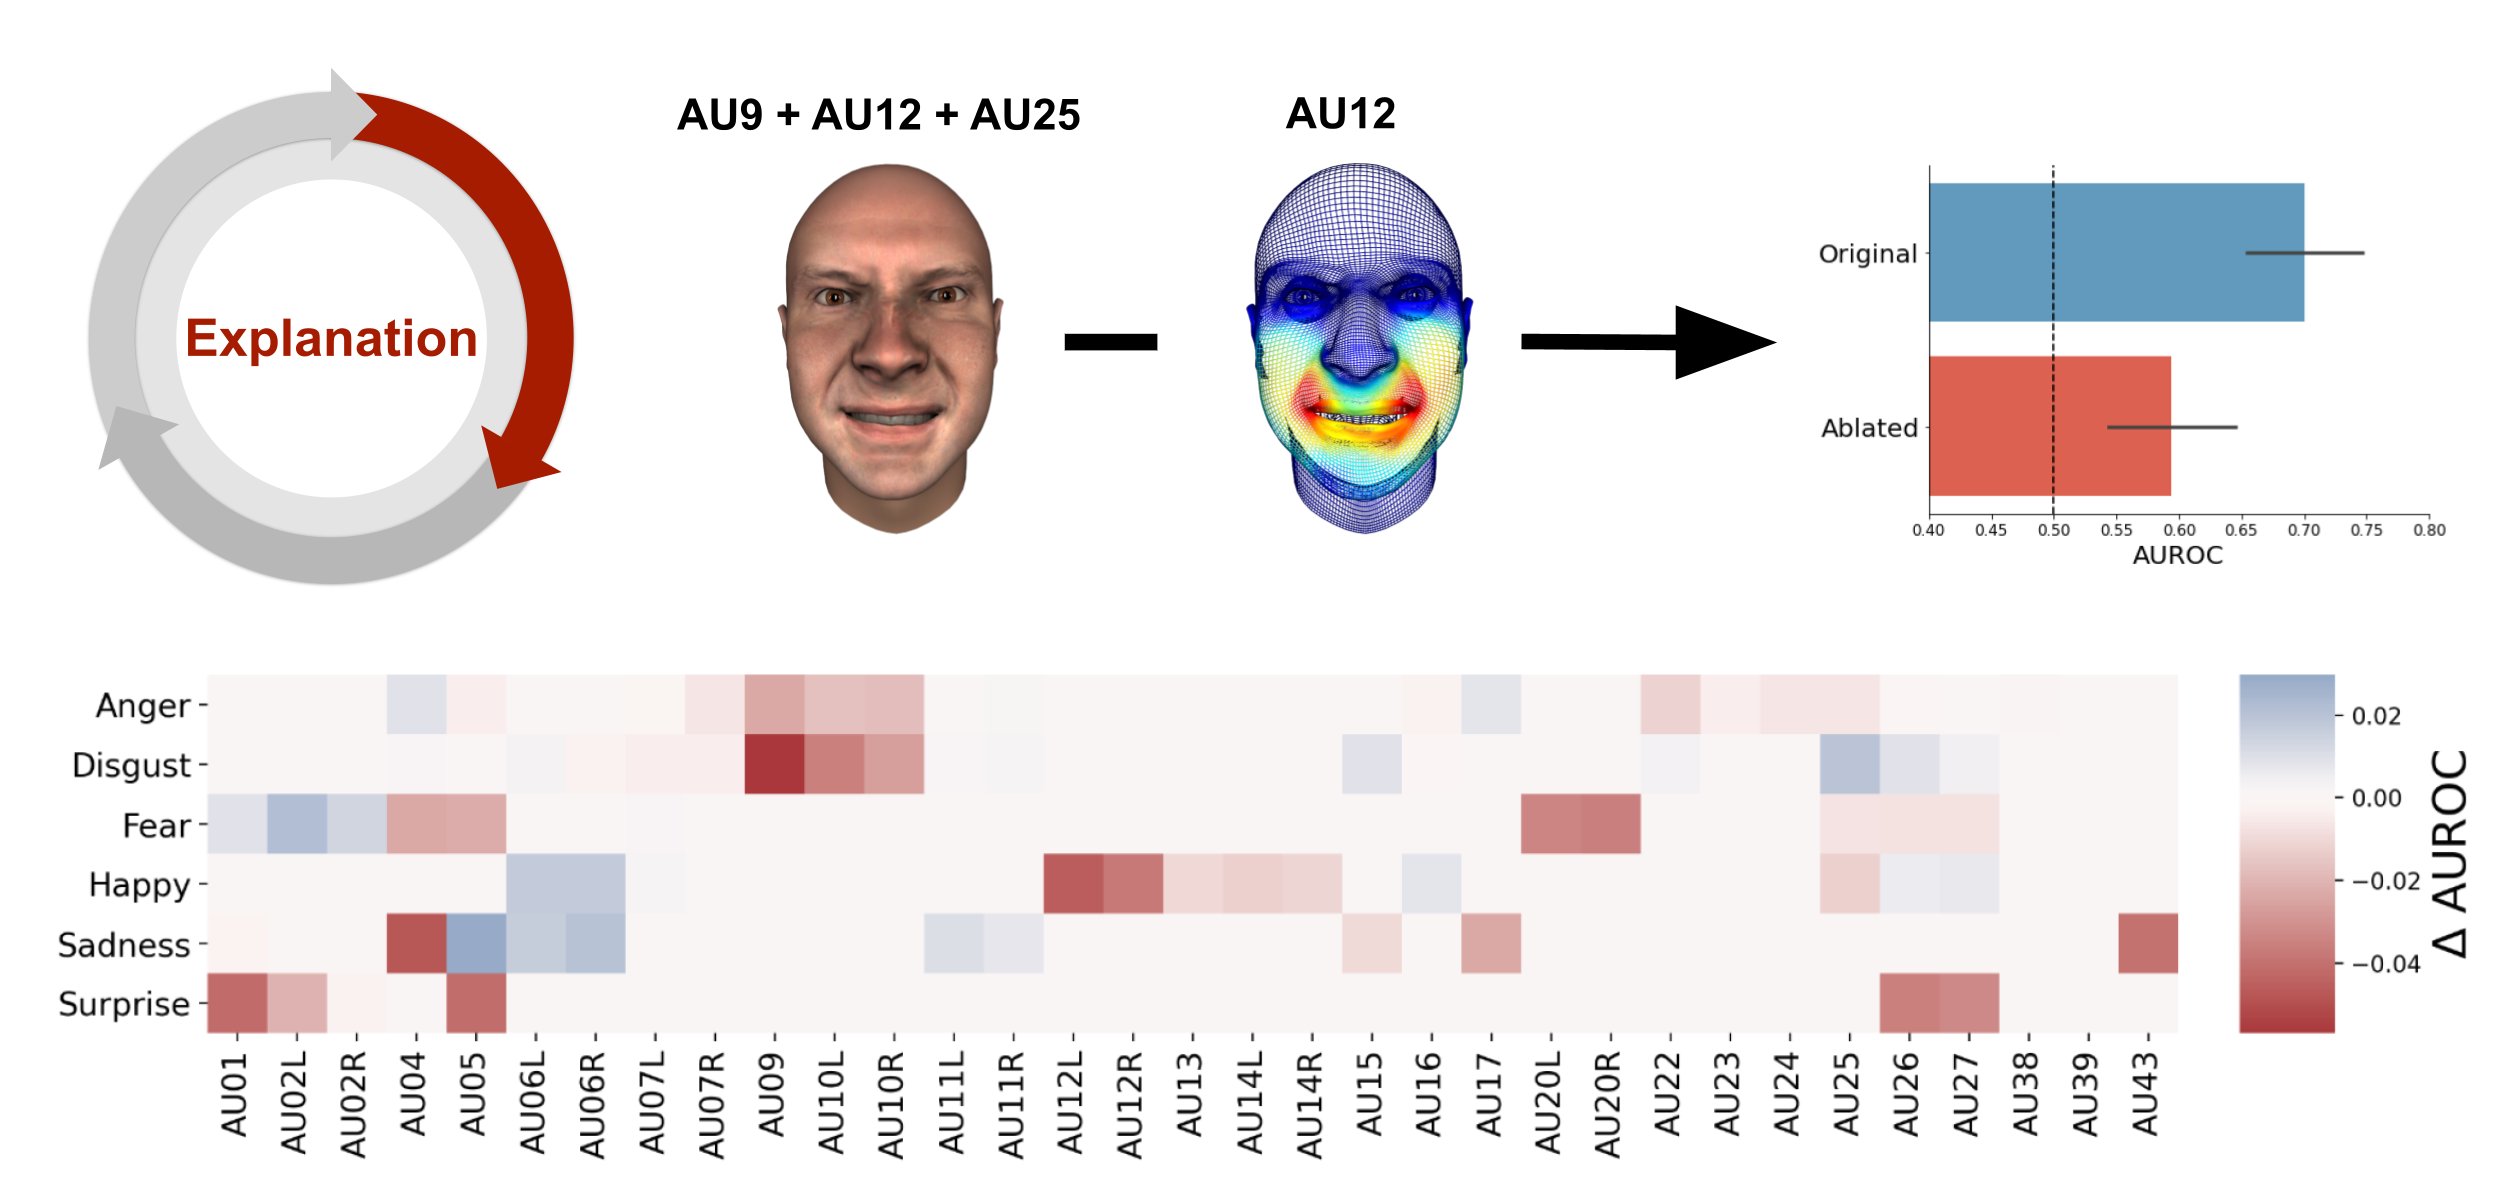 Explanation. Schematic visualization of the explanation process through ablation of single AUs. The heatmap shows the average decrease (red) or increase (blue) across mappings after ablation of a single AU (x-axis) from a particular emotion configuration (y-axis).